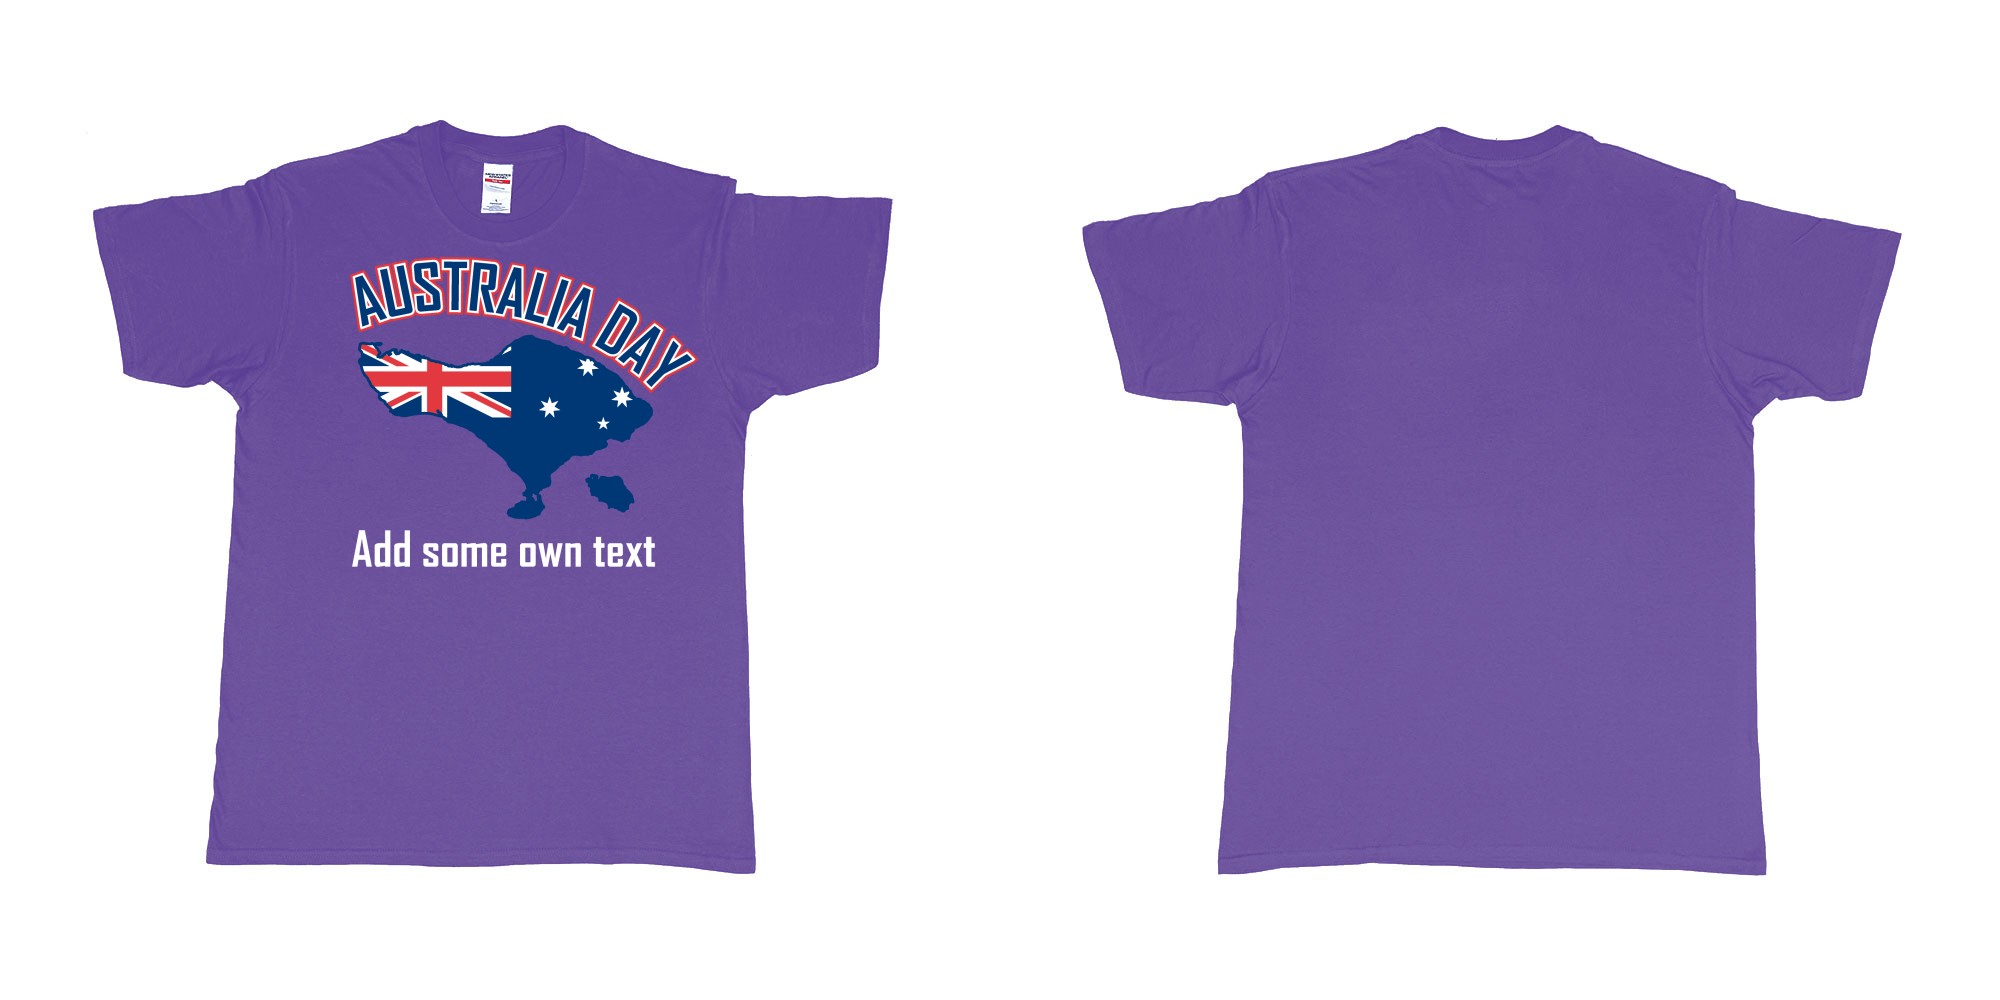 Custom tshirt design australia day in bali custom teeshirt printing in fabric color purple choice your own text made in Bali by The Pirate Way